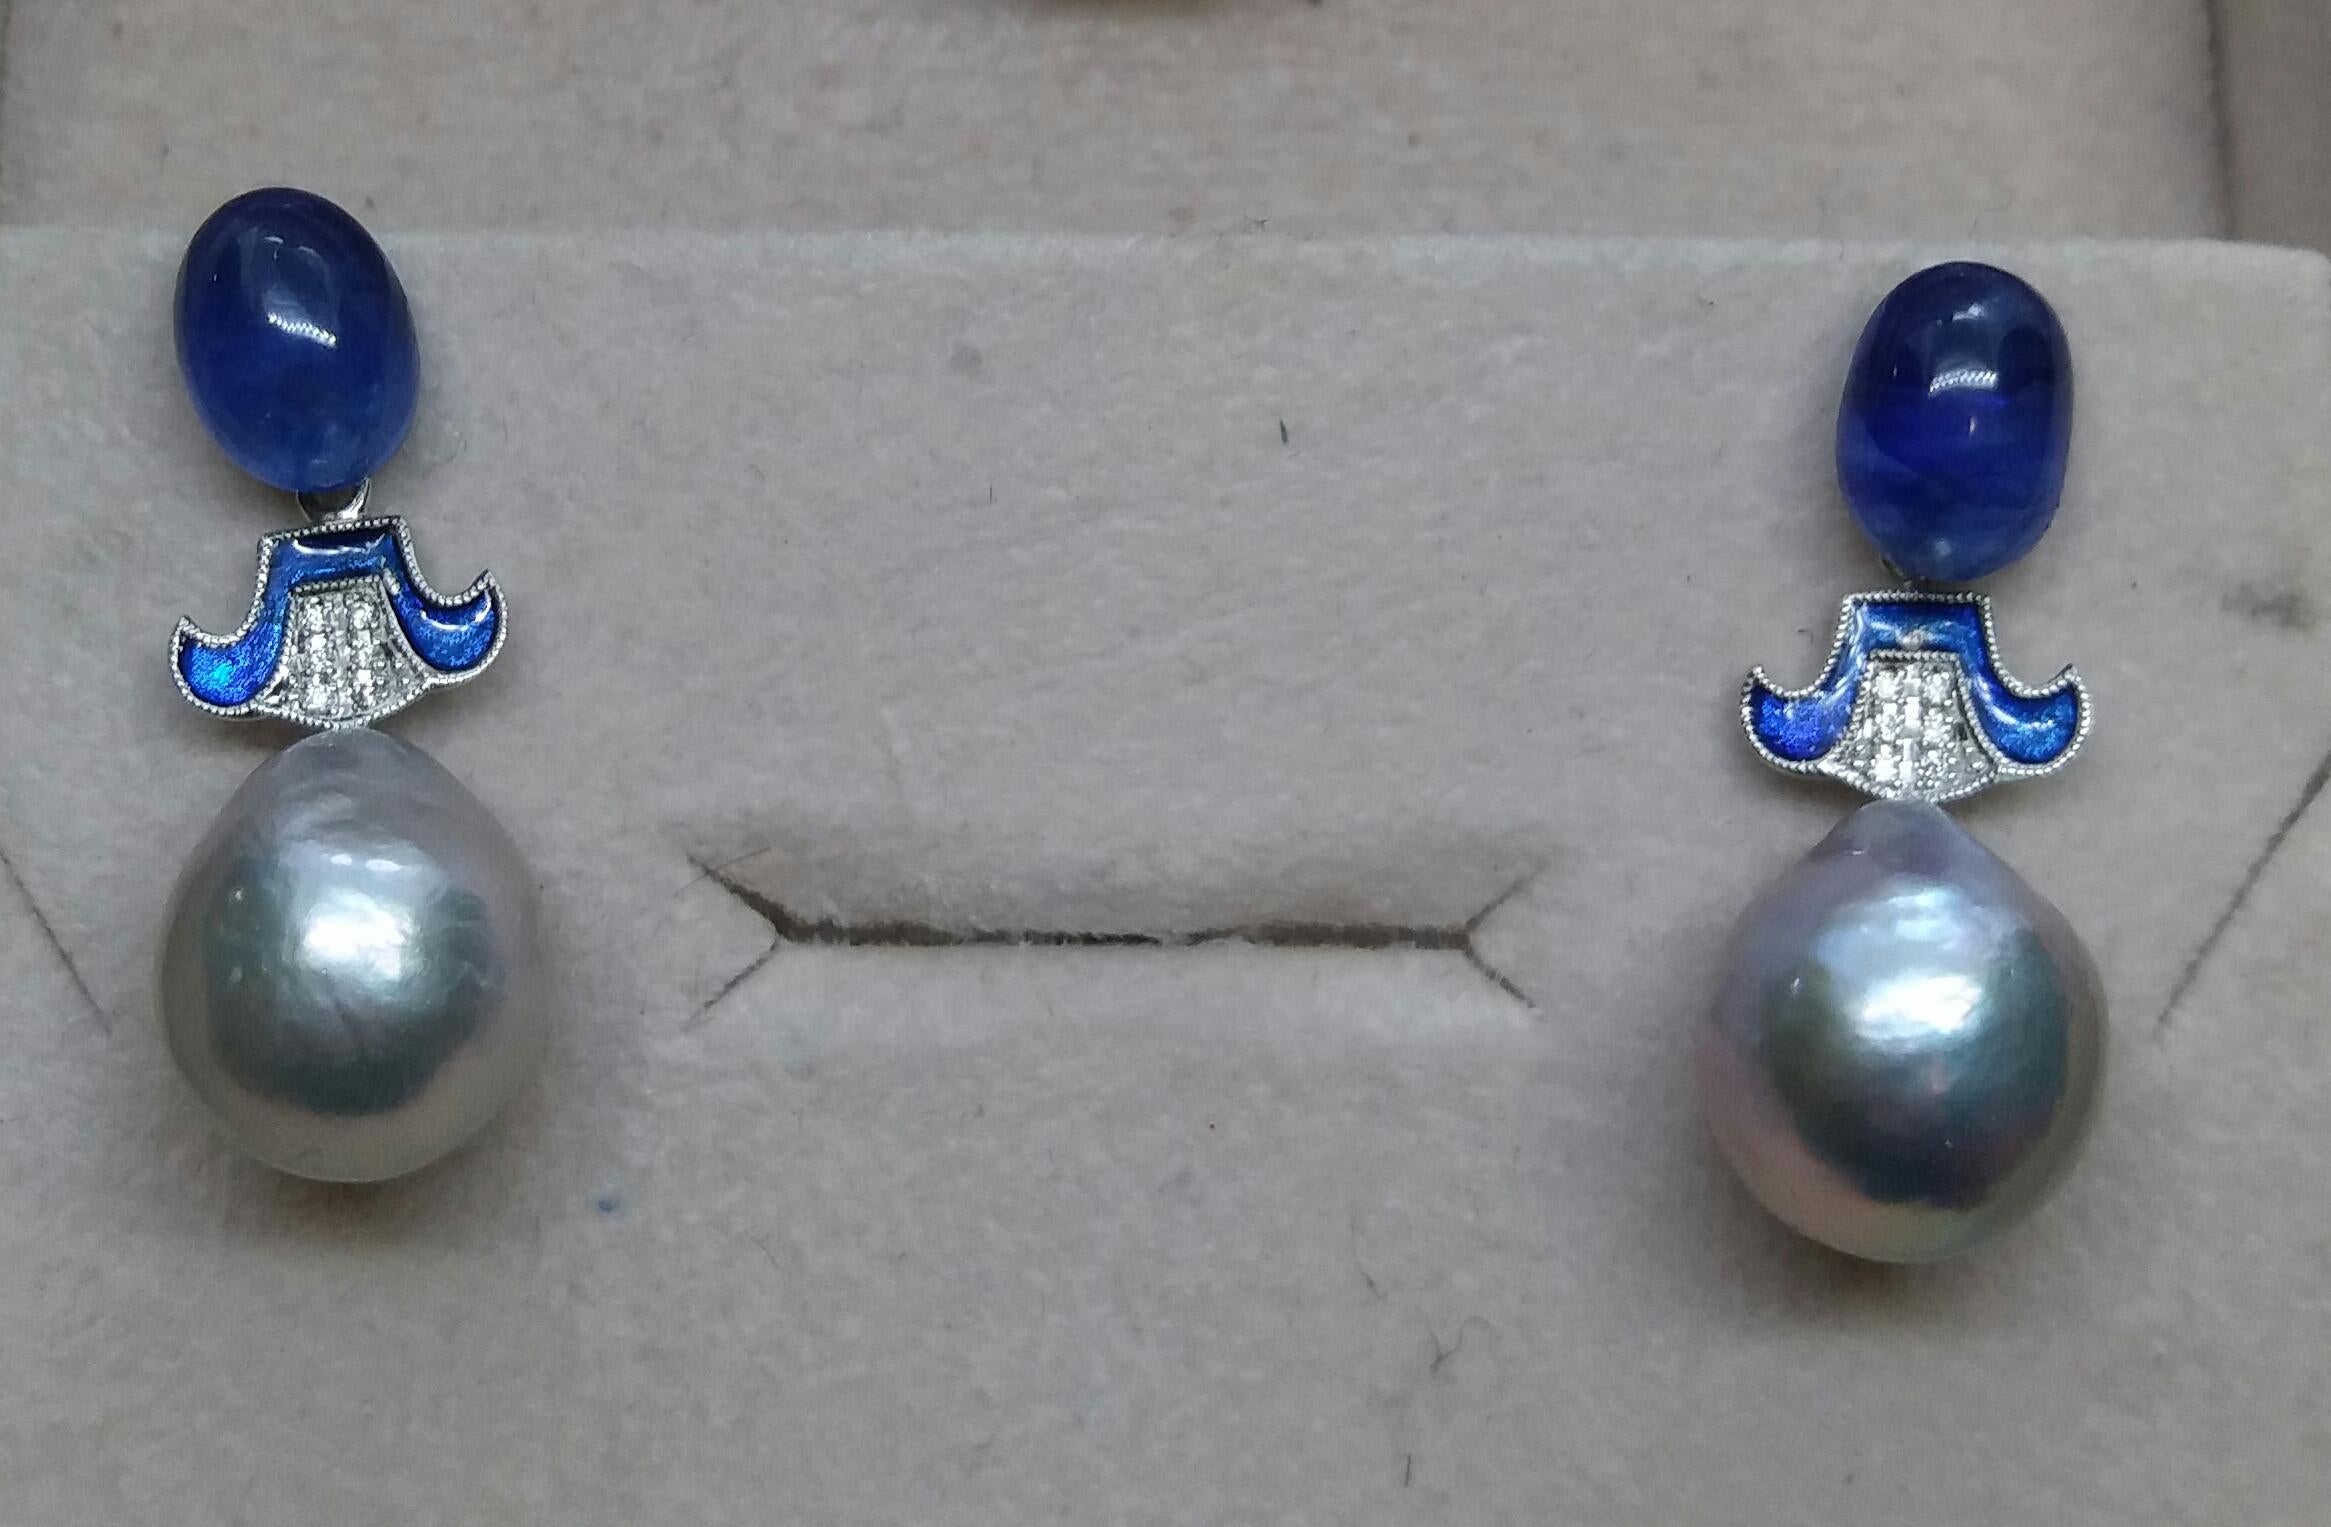 2  Blue Sapphire oval cabs 7,5 x 10 mm. are the upper parts, then the central parts are in white gold,12 round full cut  diamonds and Blue Enamel, the lower parts are composed of 2 Grey Baroque pearls with a diameter of 12 mm each.

In 1978 our